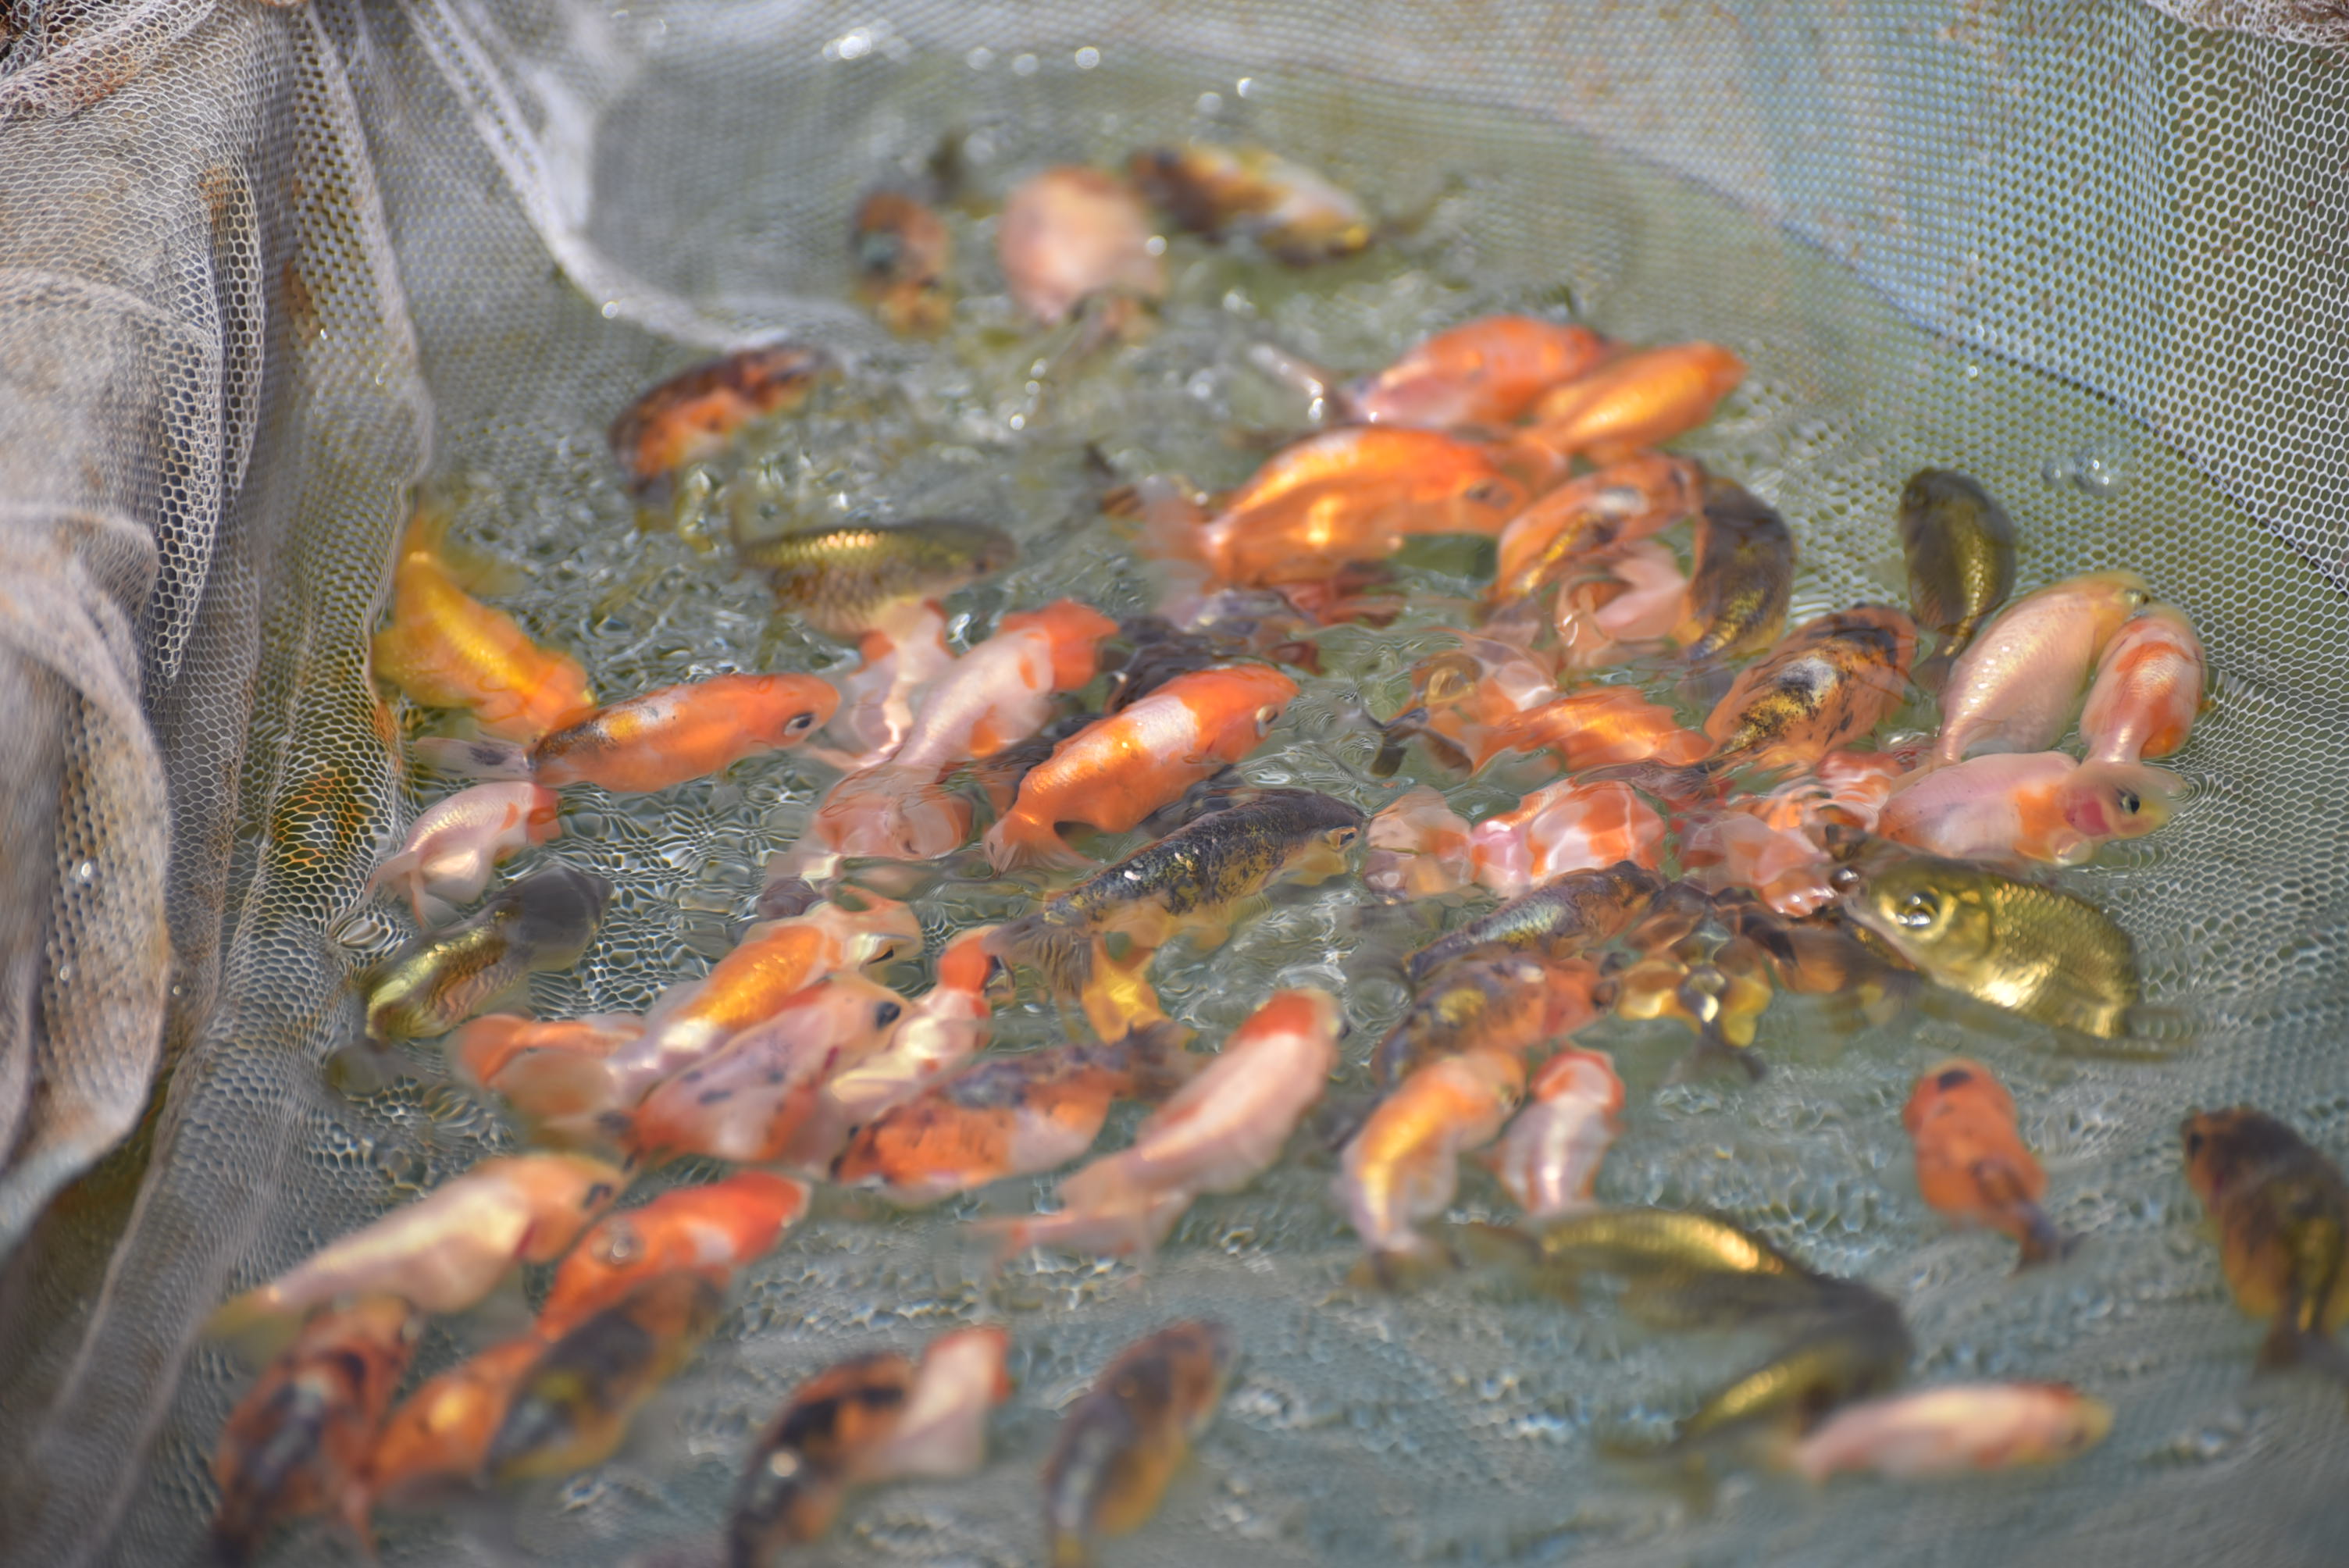 Goldfish thrive at Tran Quoc Dat’s farm in Cu Chi District, Ho Chi Minh City. Photo: Ngoc Phuong / Tuoi Tre News